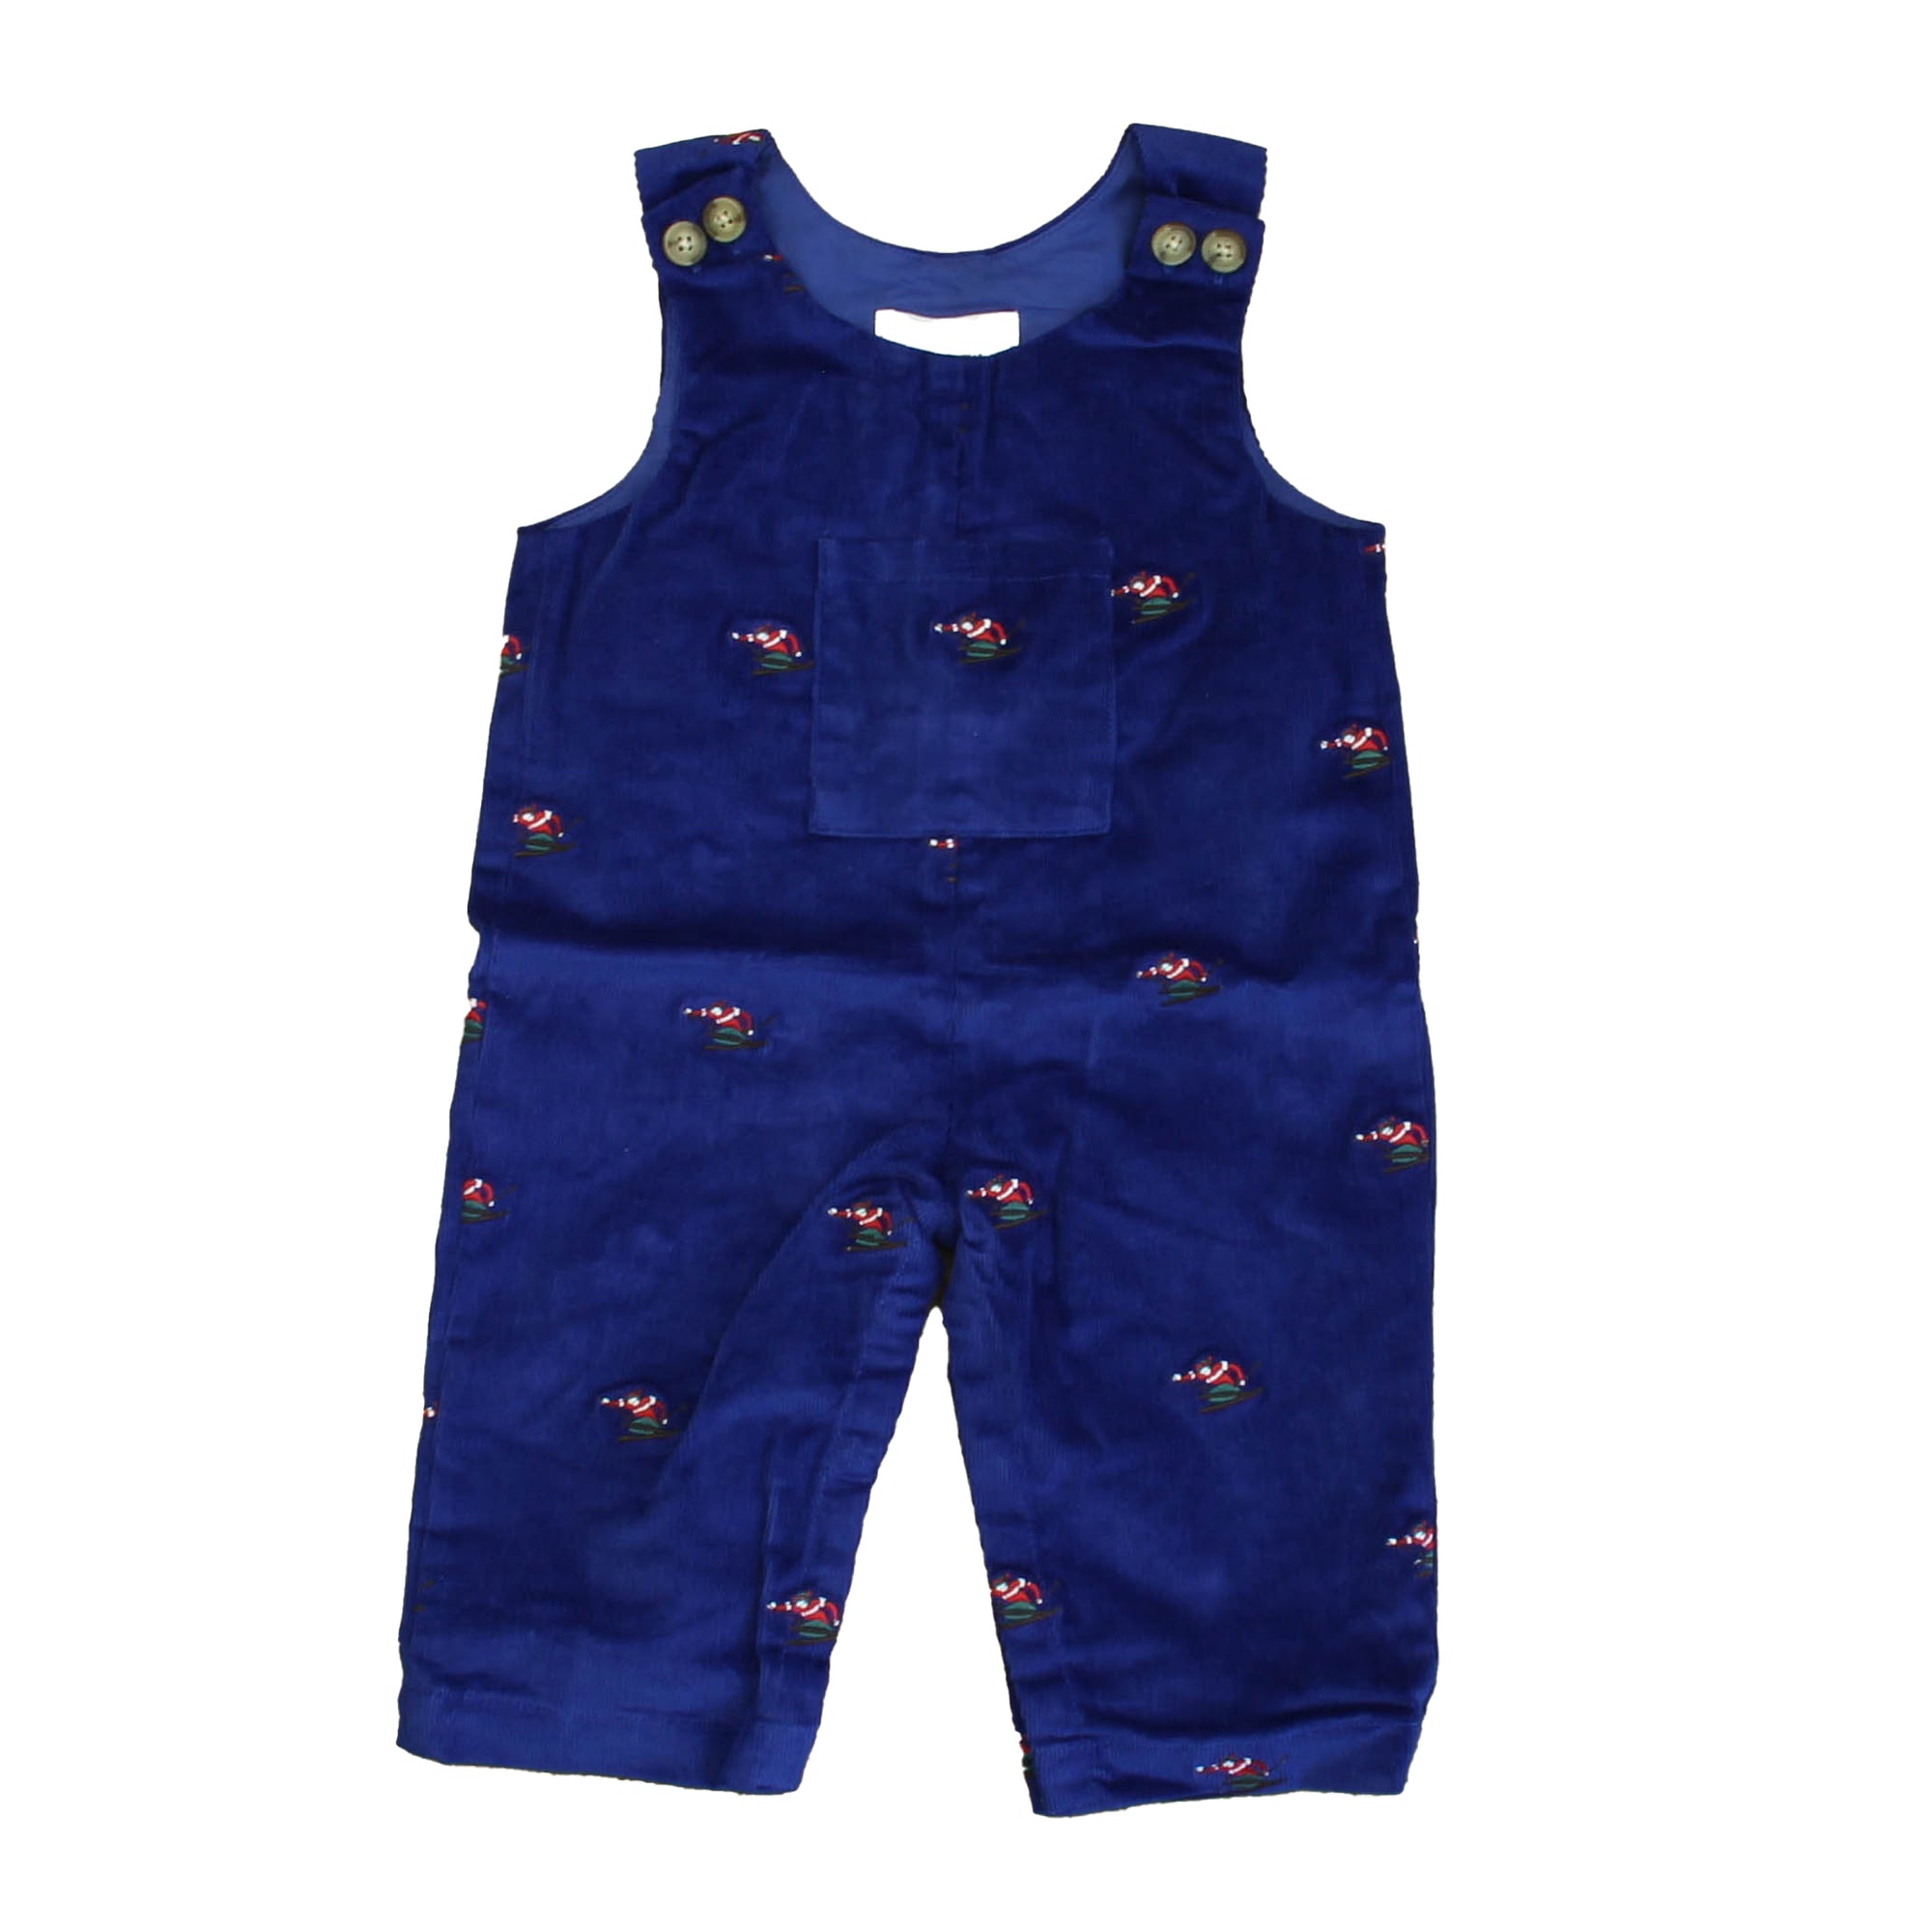 Navy with Skiers / 6-12 months